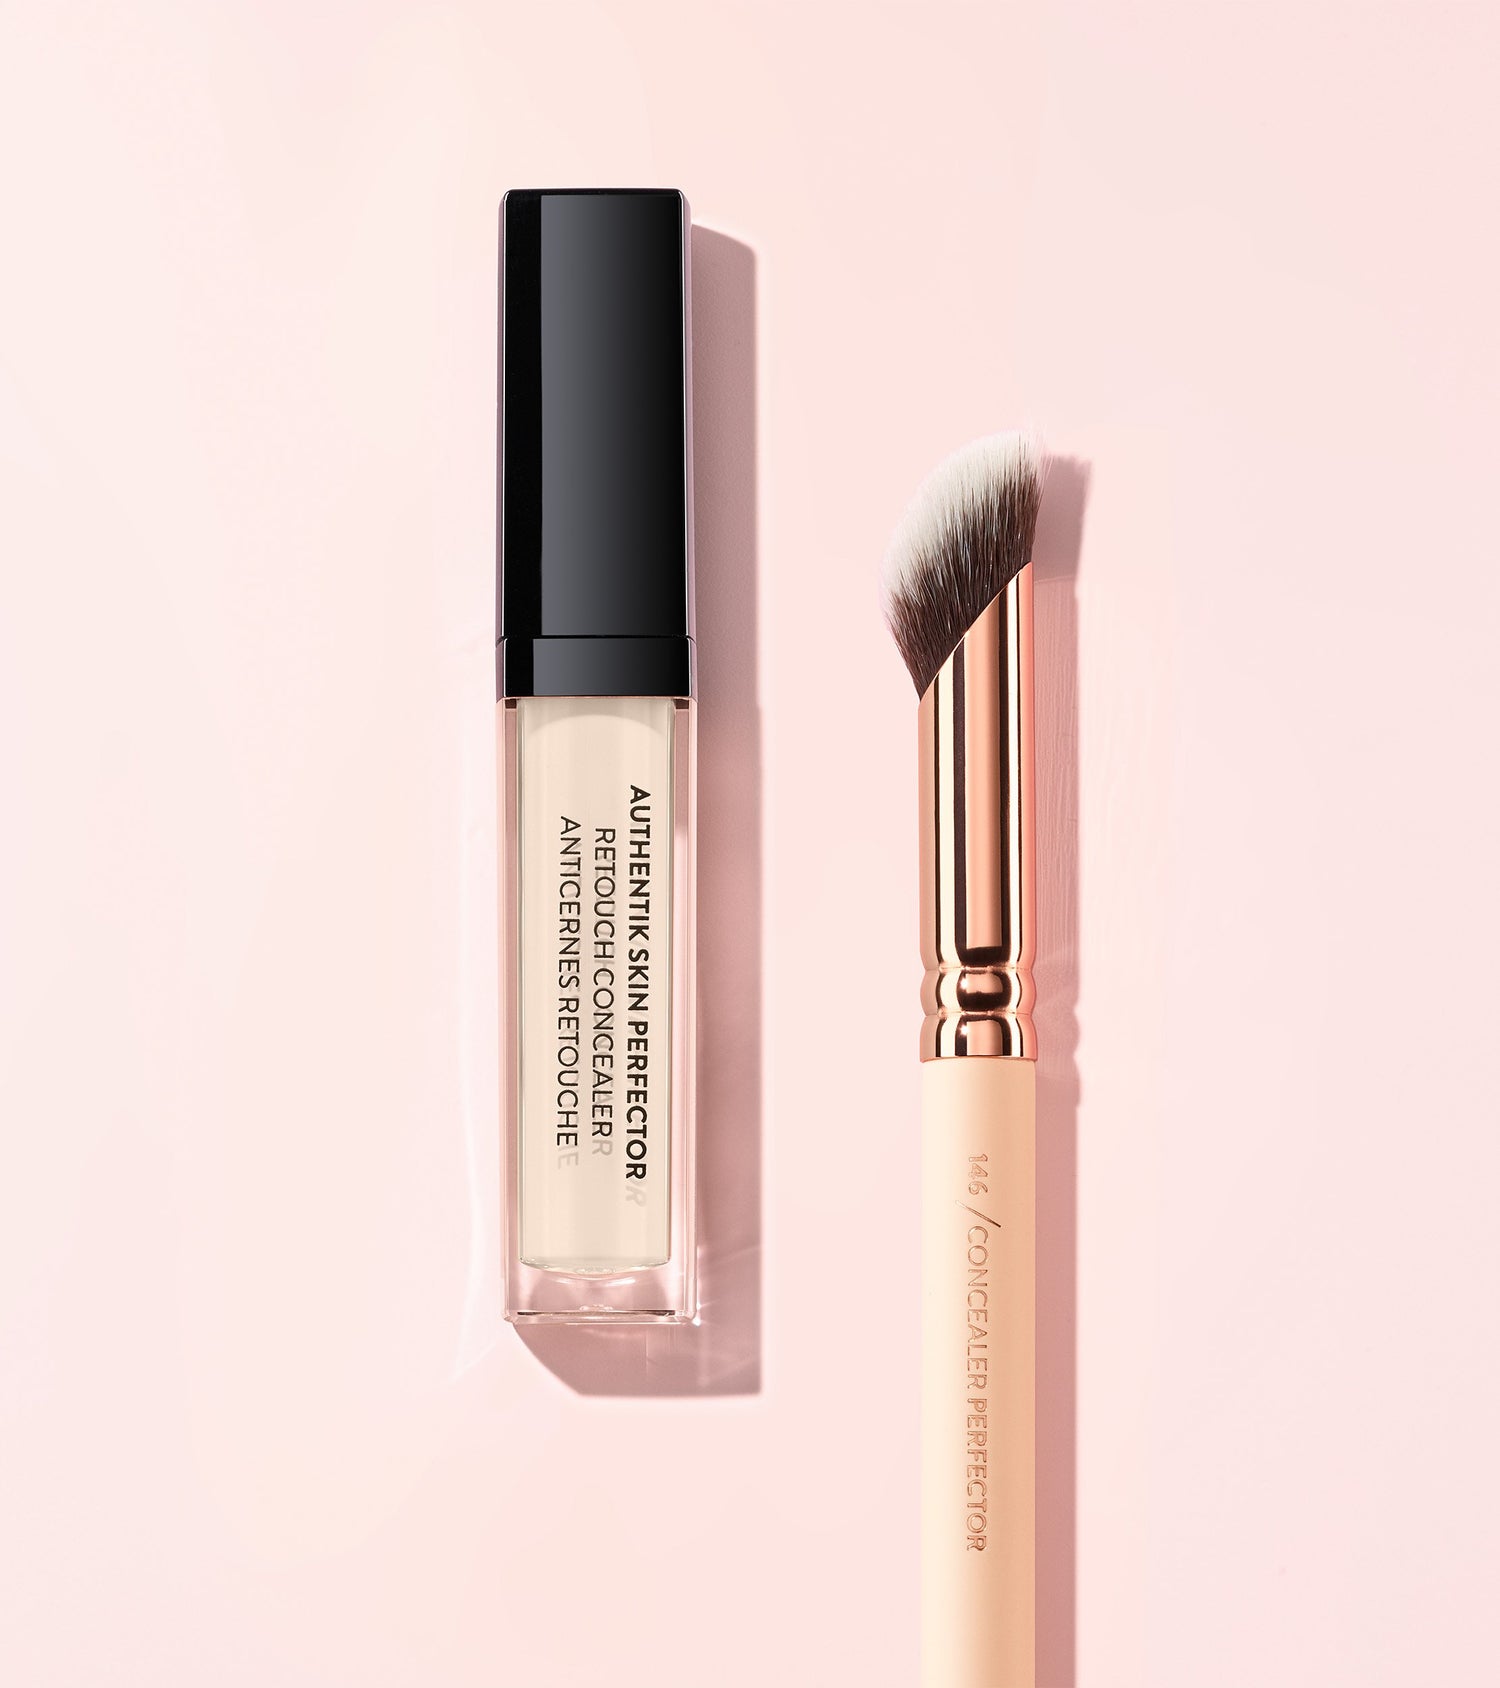 AUTHENTIK SKIN PERFECTOR CONCEALER (020 ACCURATE) Main Image featured